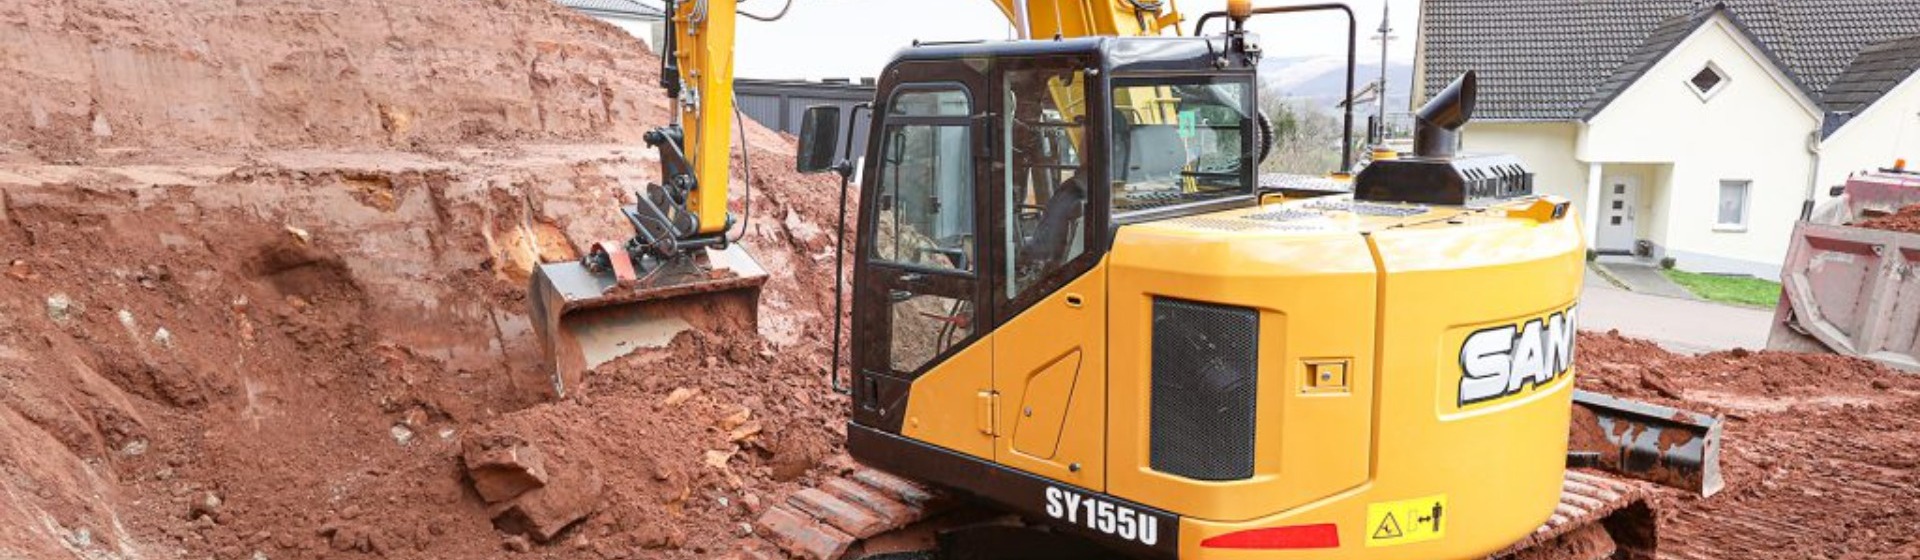 SANY DIGS INTO NEW GROUND WITH MACHINE ARRIVALS